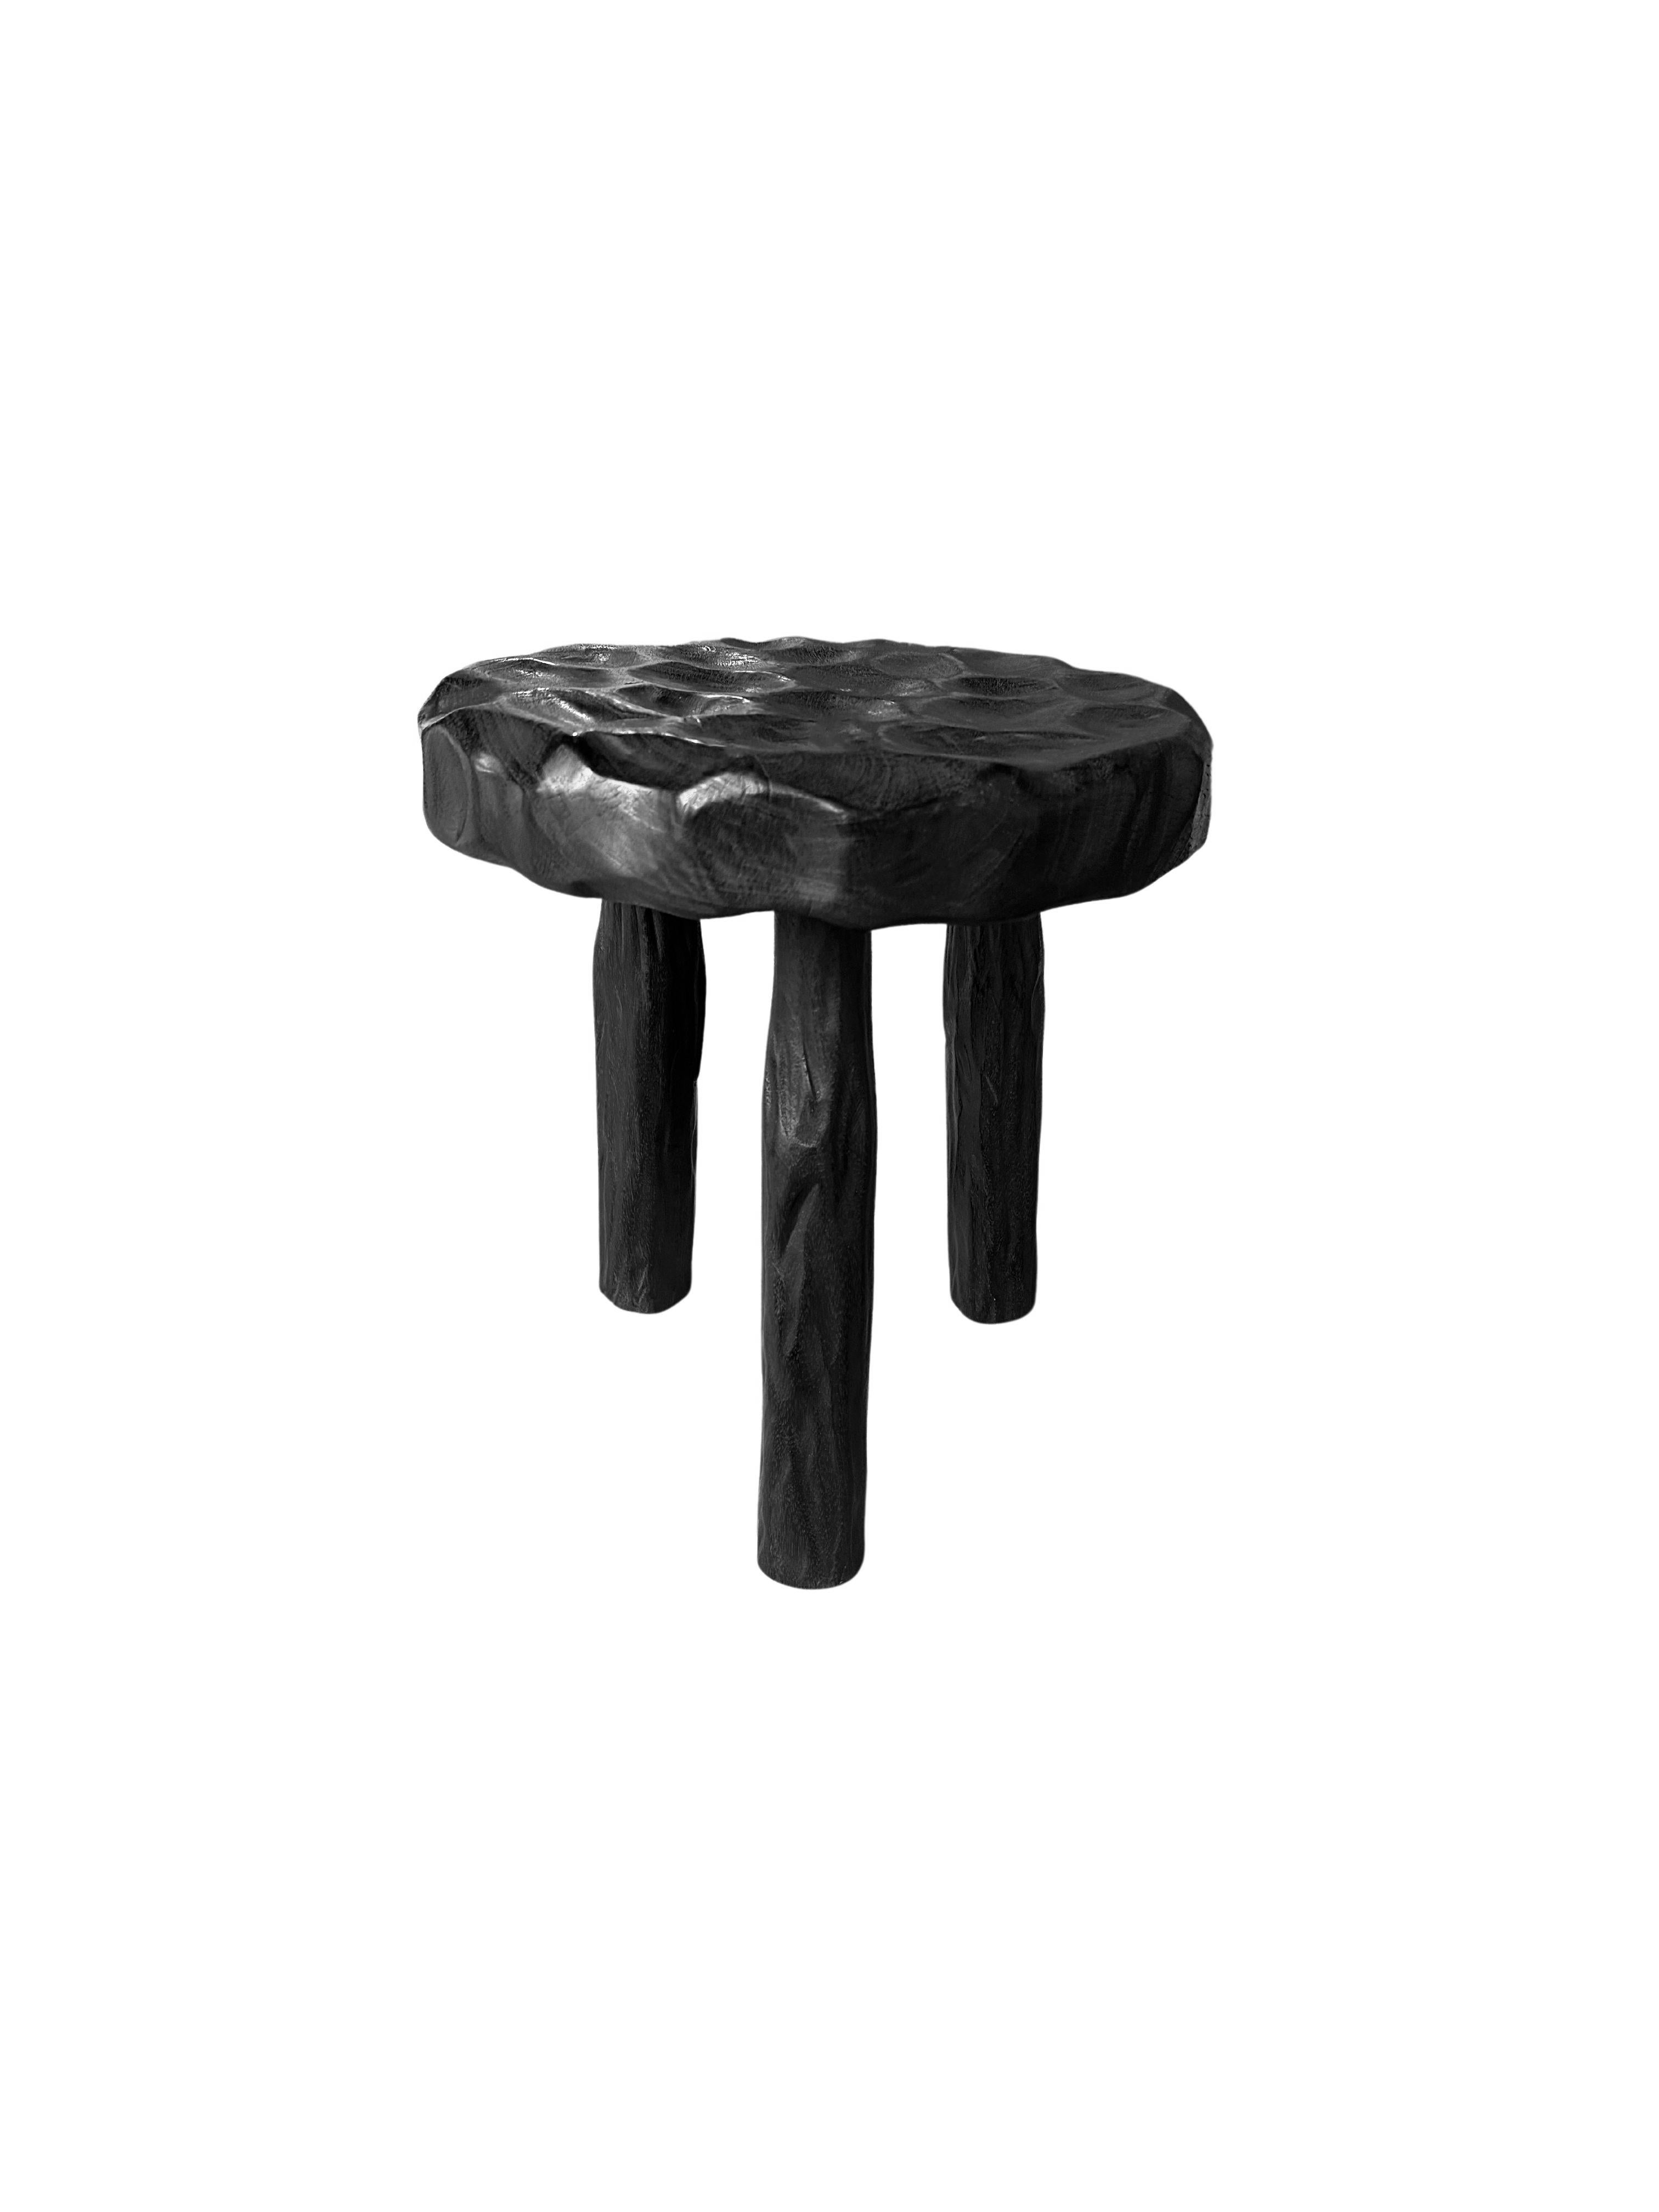 An elegantly rounded, sculptural stool crafted from mango wood. Unique to this stool is the hand-hewn detailing on all sides providing a wonderful contrast of textures. To achieve its black pigment the wood was burnt multiple times and finished with